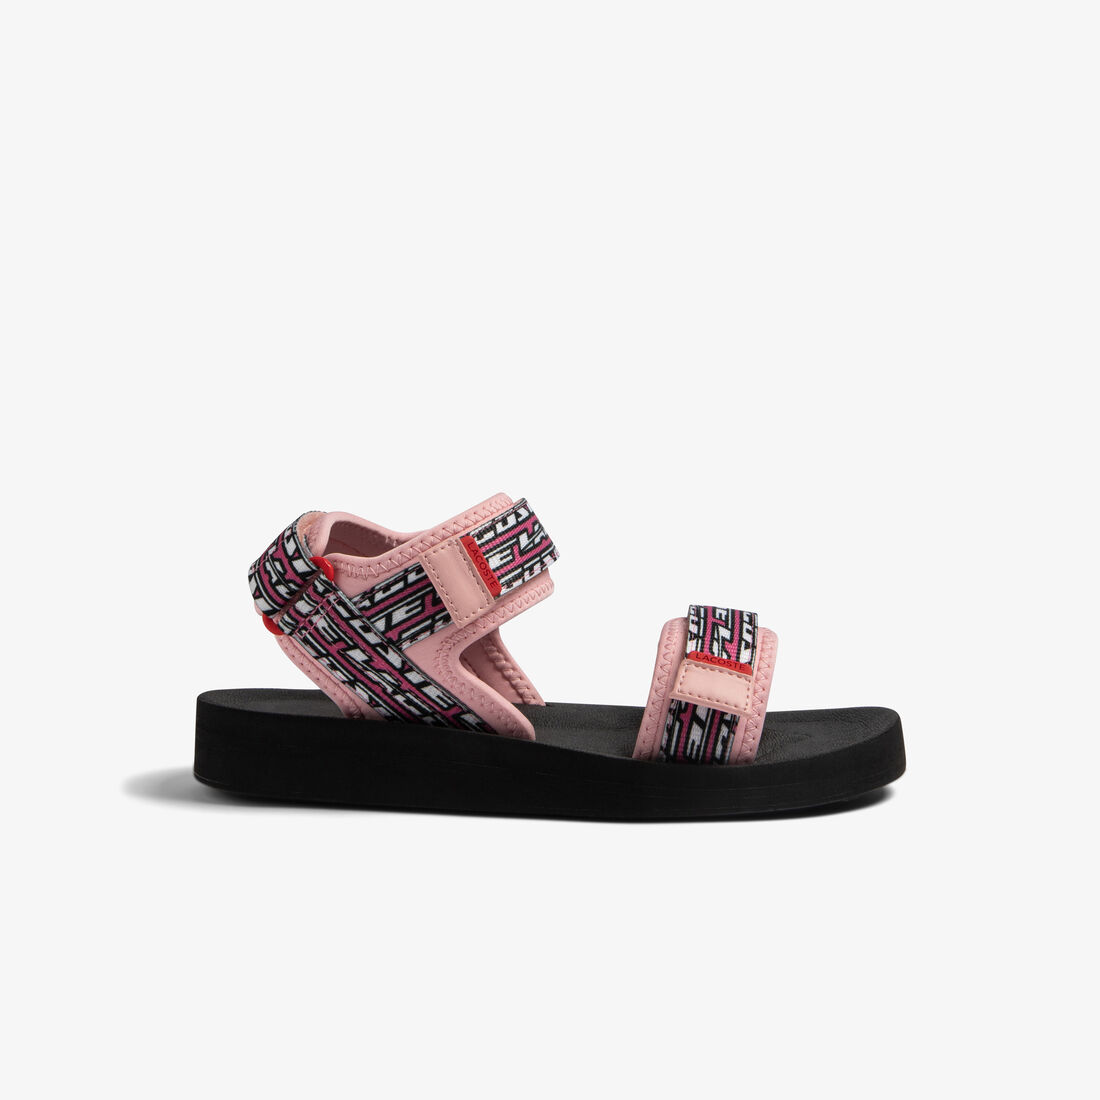 Women's Lacoste Suruga Synthetic Sandals